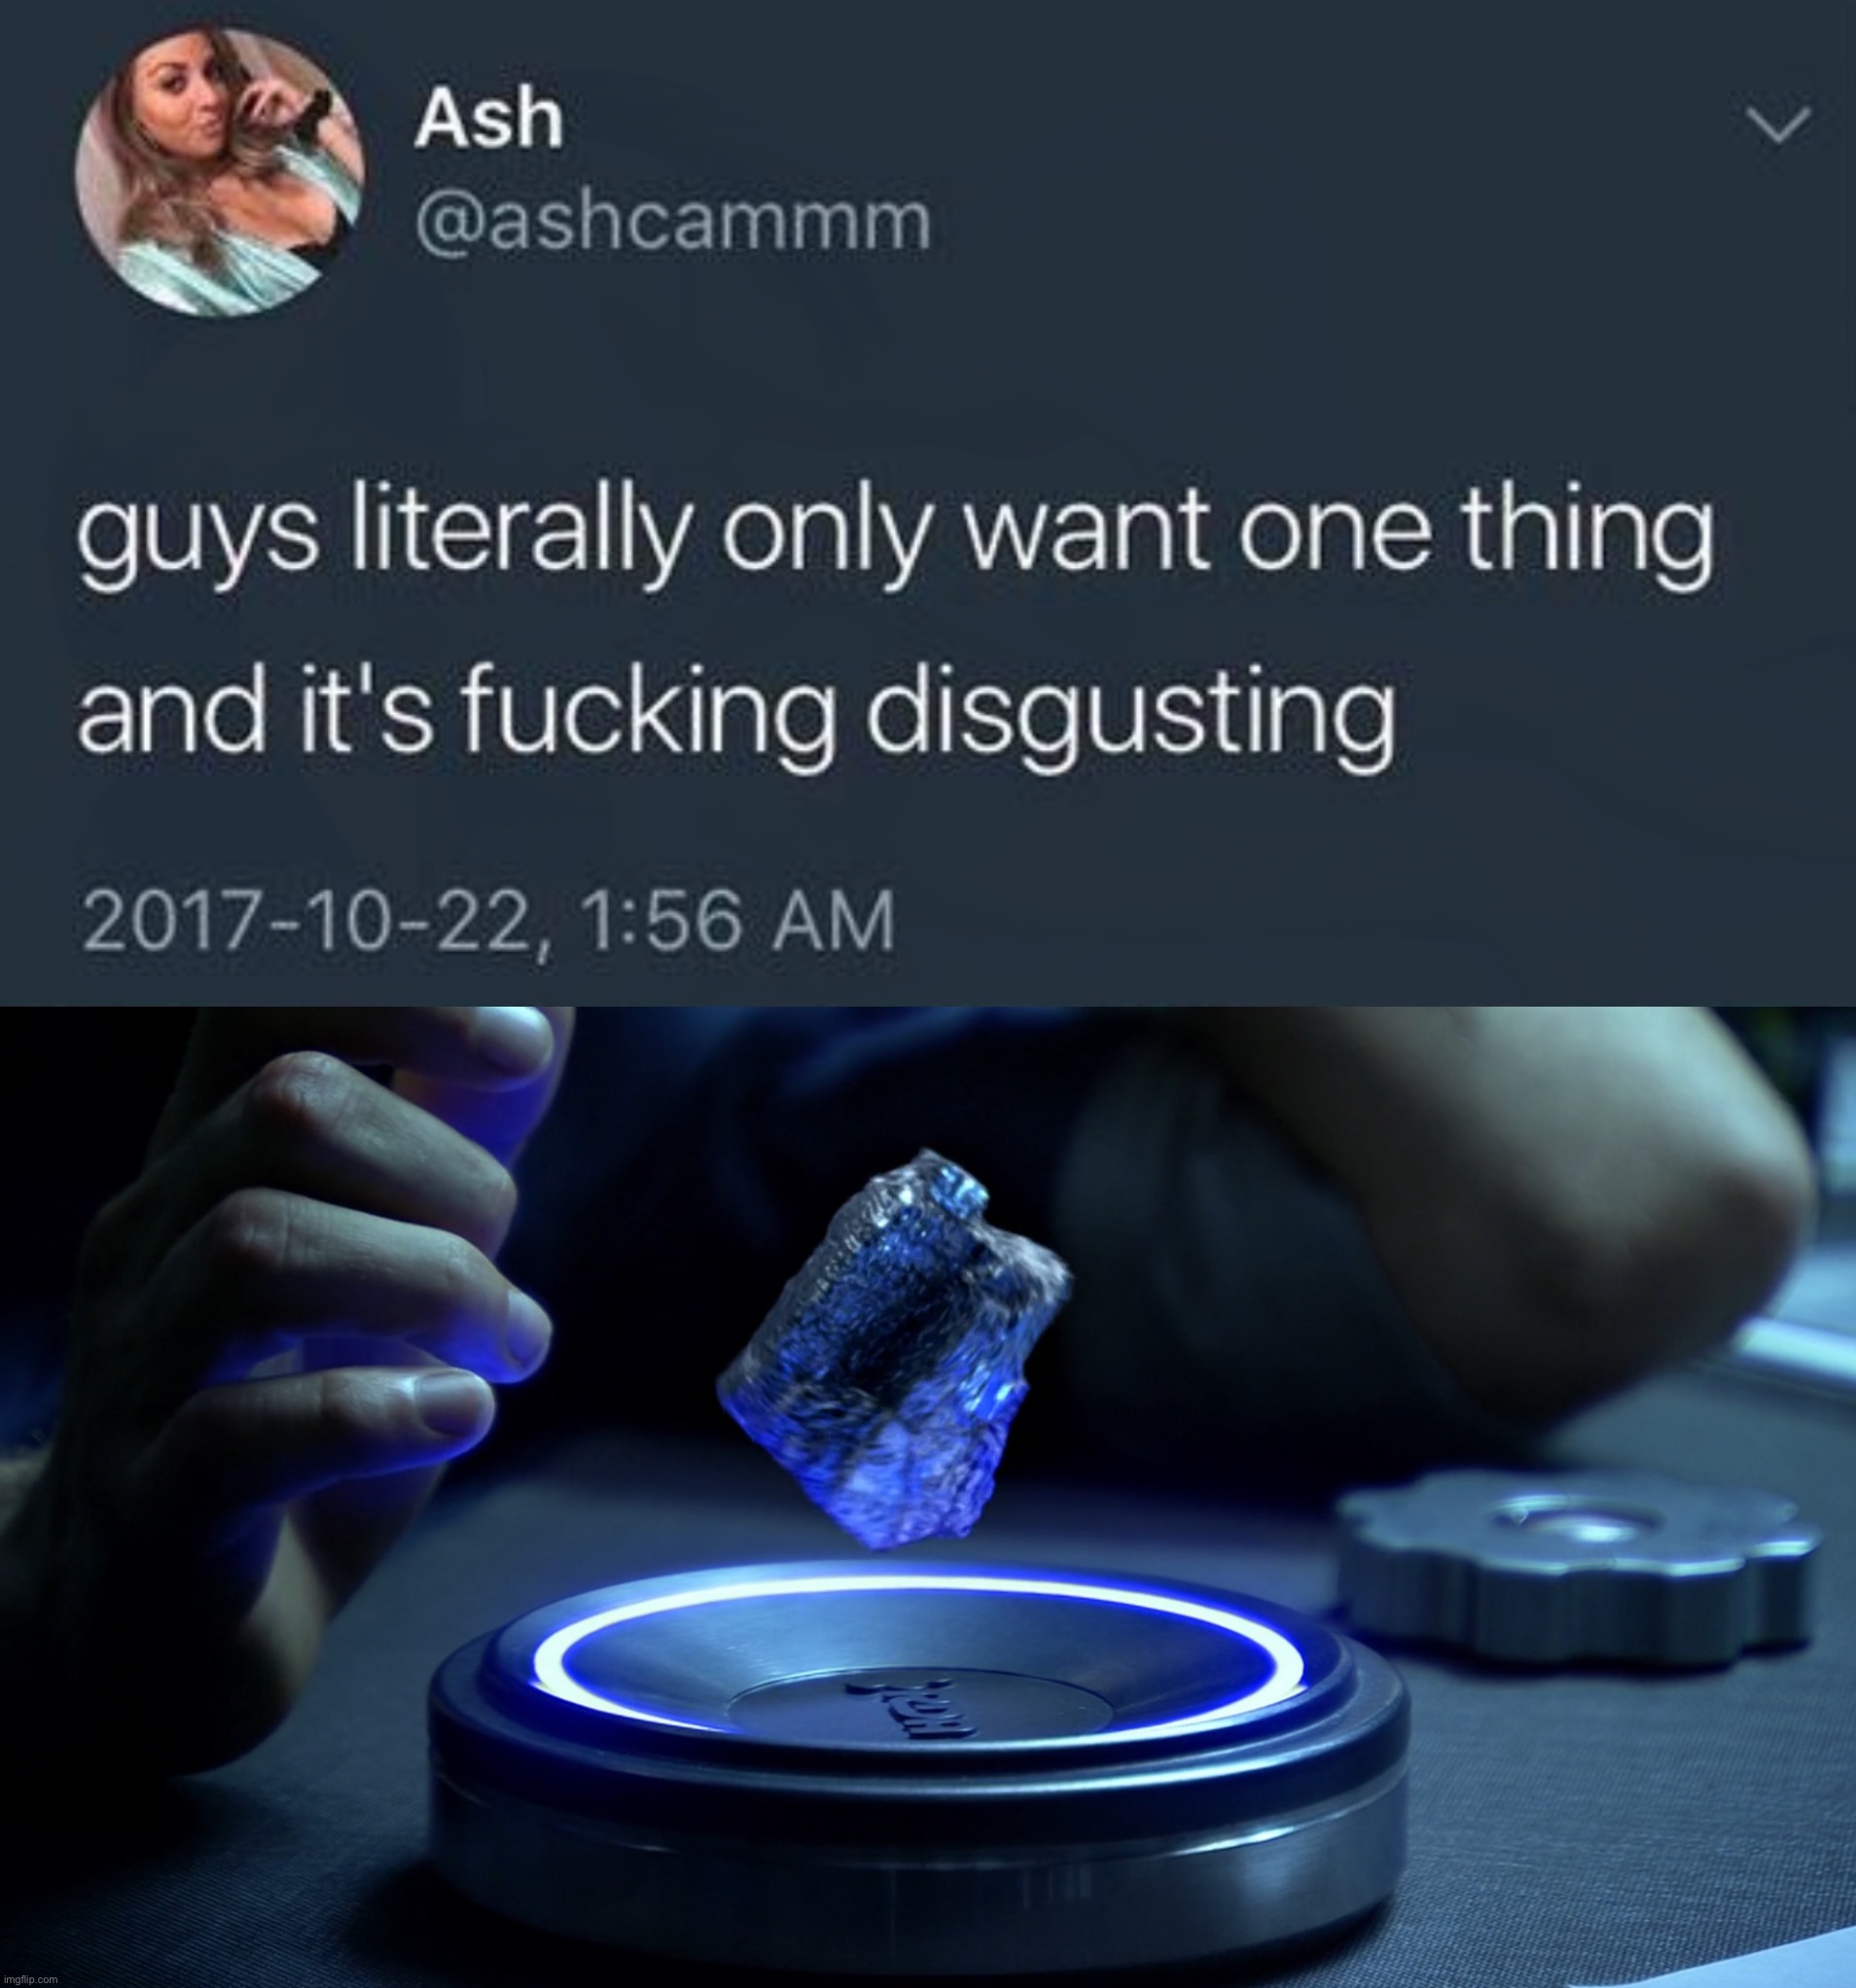 Unobtanium | image tagged in unobtanium,avatar,mineral,resources,guys literally only want one thing,pandora | made w/ Imgflip meme maker